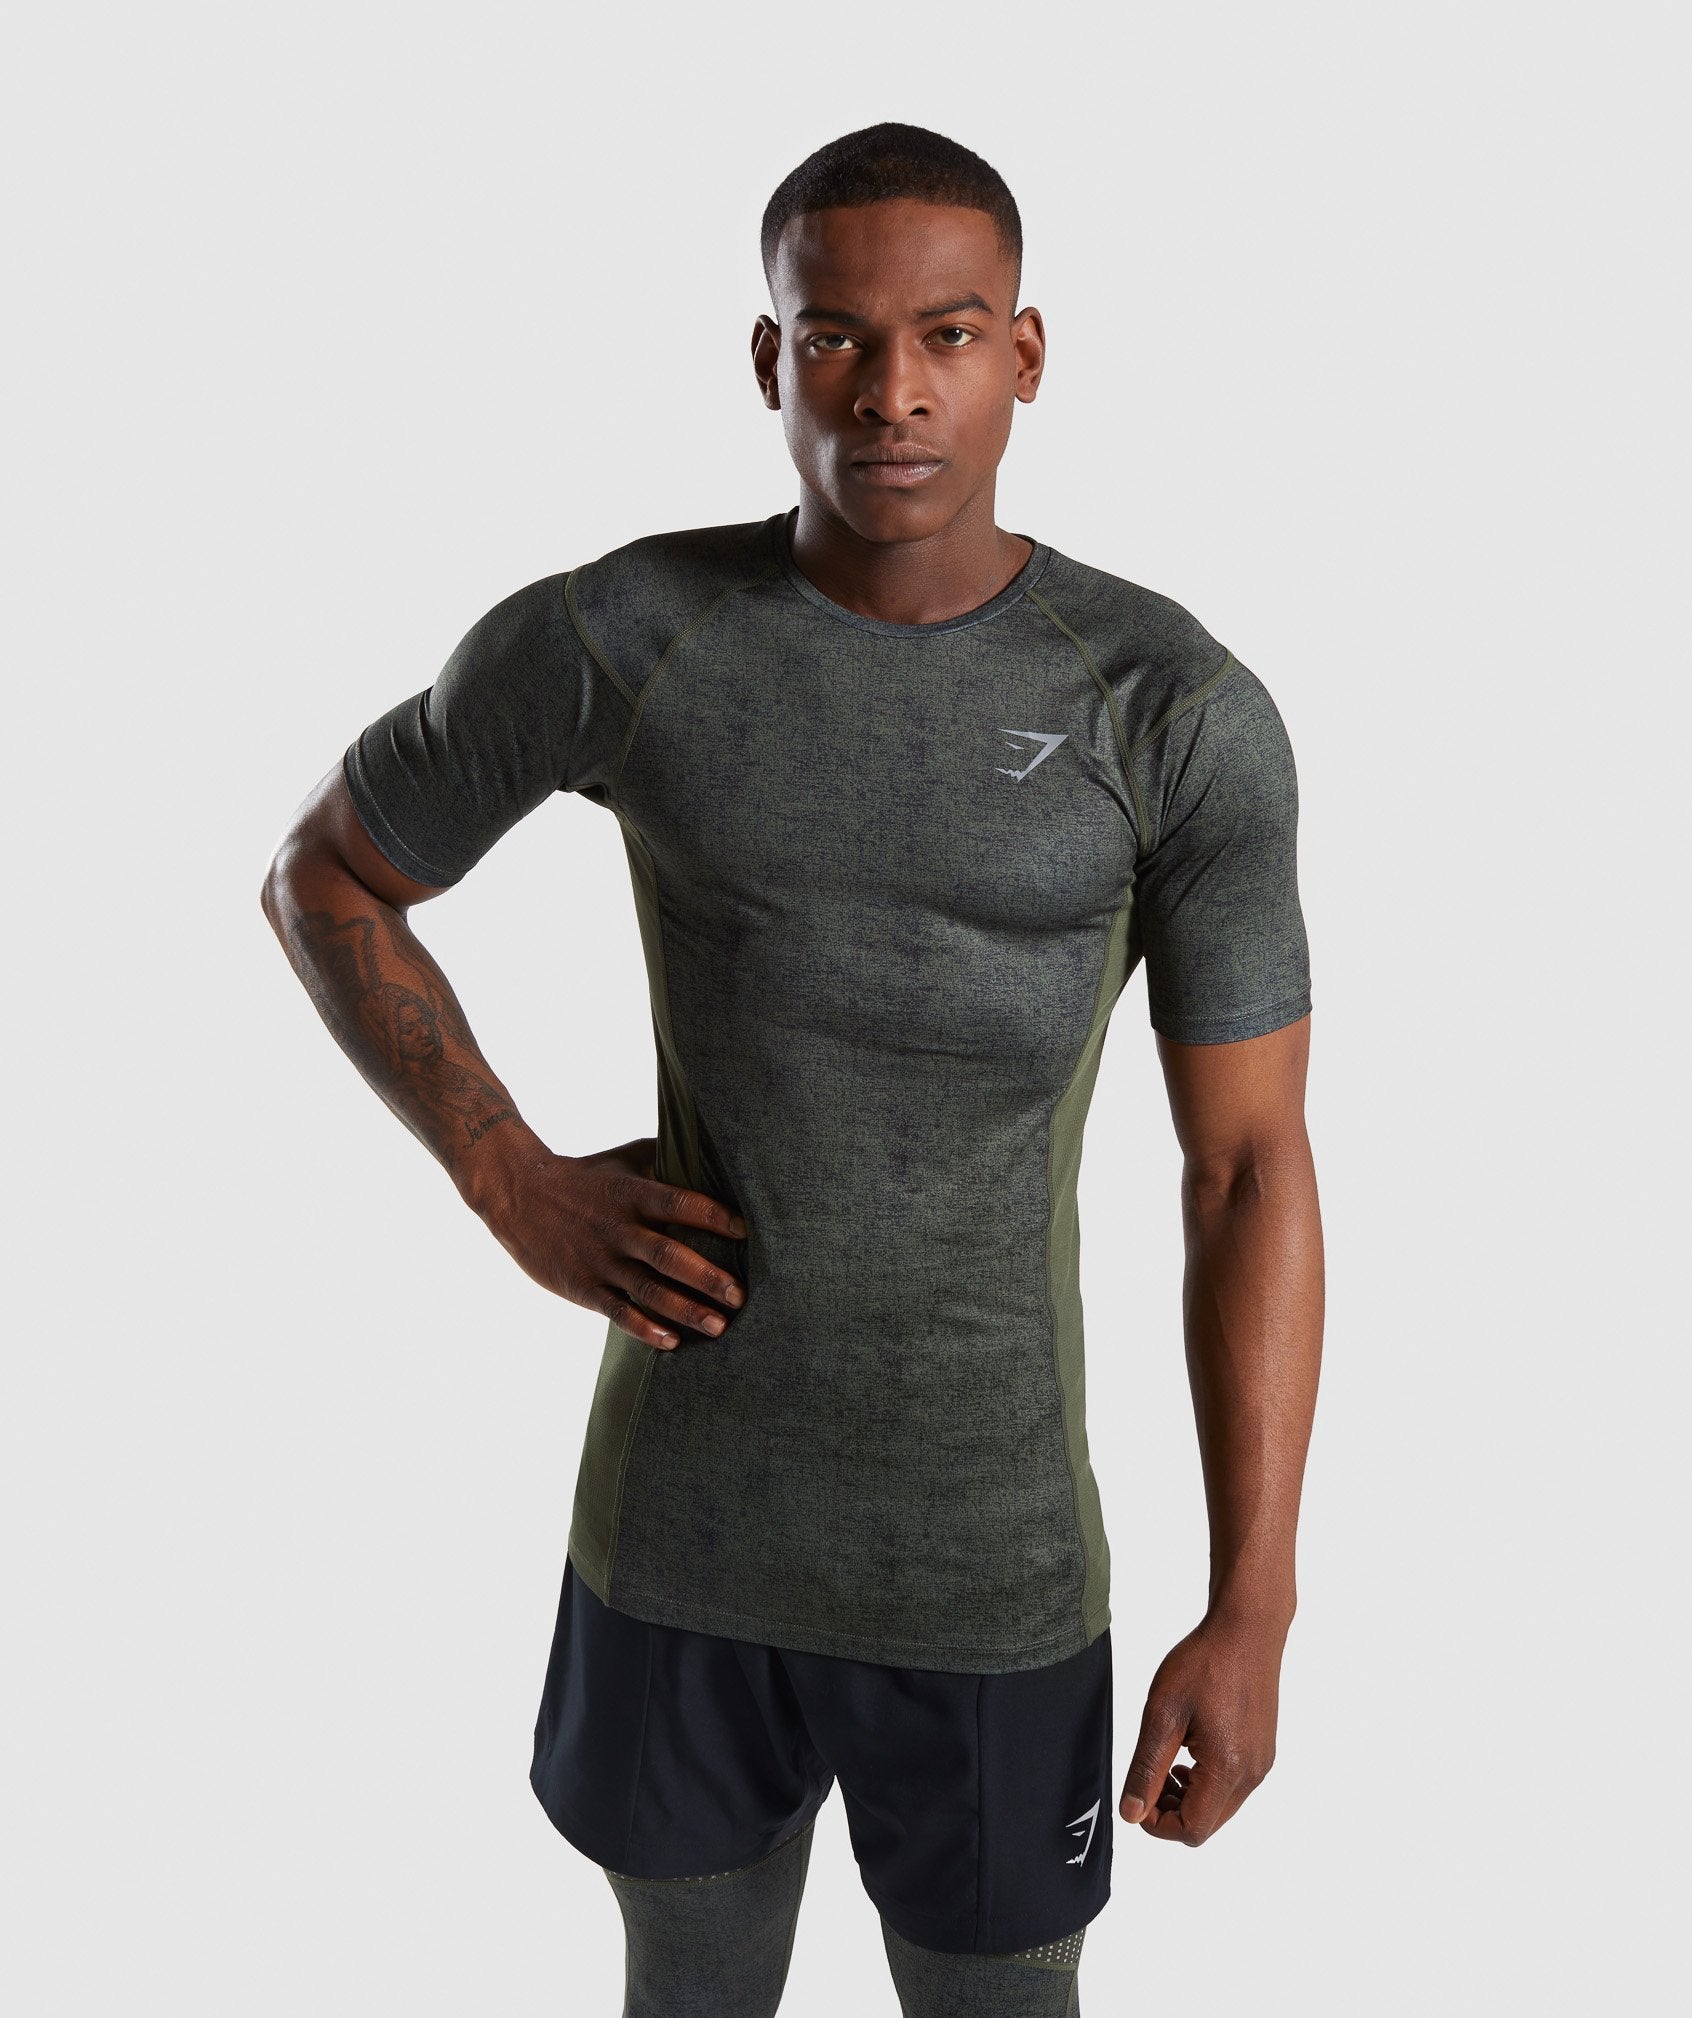 Hybrid Baselayer Top in Woodland Green Marl - view 1